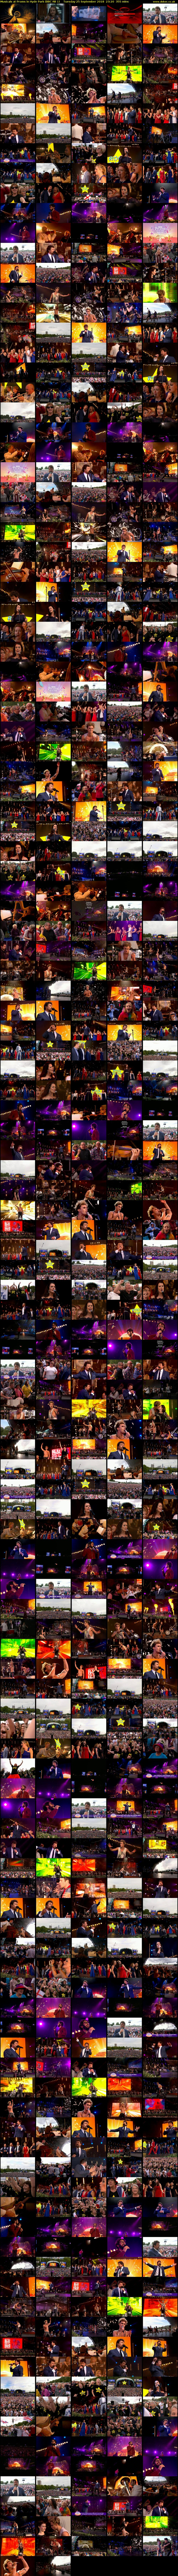 Musicals at Proms in Hyde Park (BBC RB 1) Tuesday 25 September 2018 23:20 - 05:15